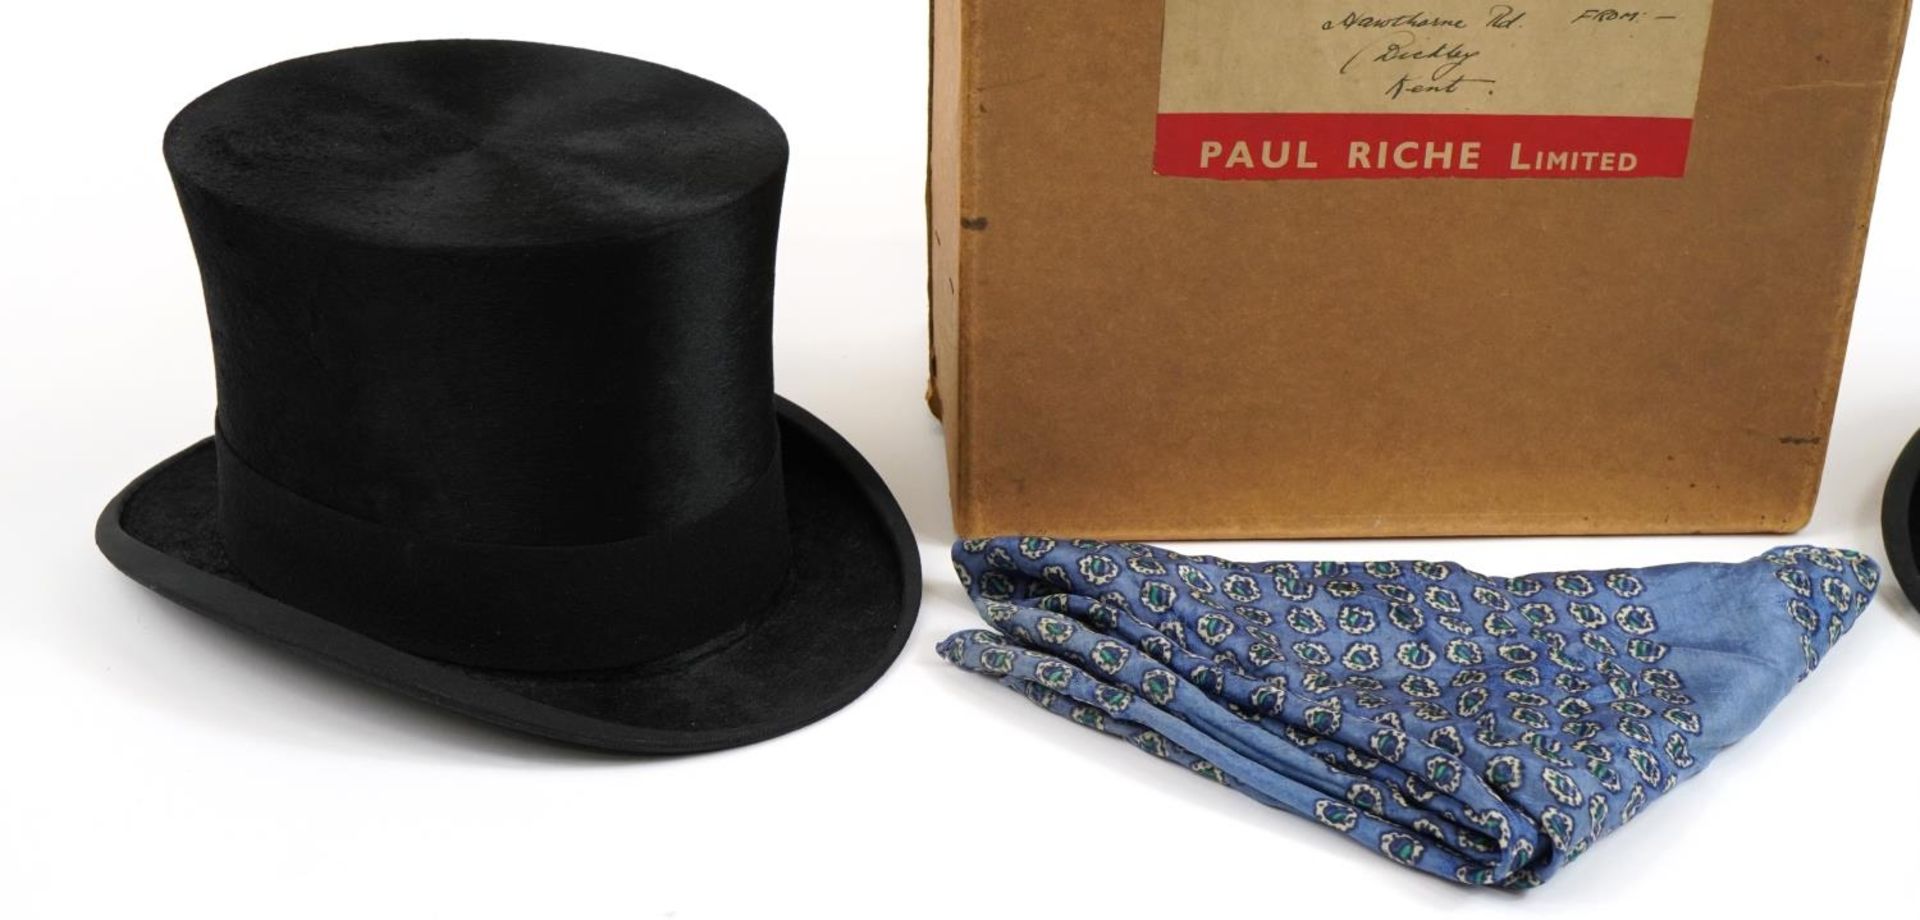 Gentlemen's Scott & Co Piccadilly moleskin top hat with box and a Dunn & Co gentlemen's bowler hat - Image 2 of 6